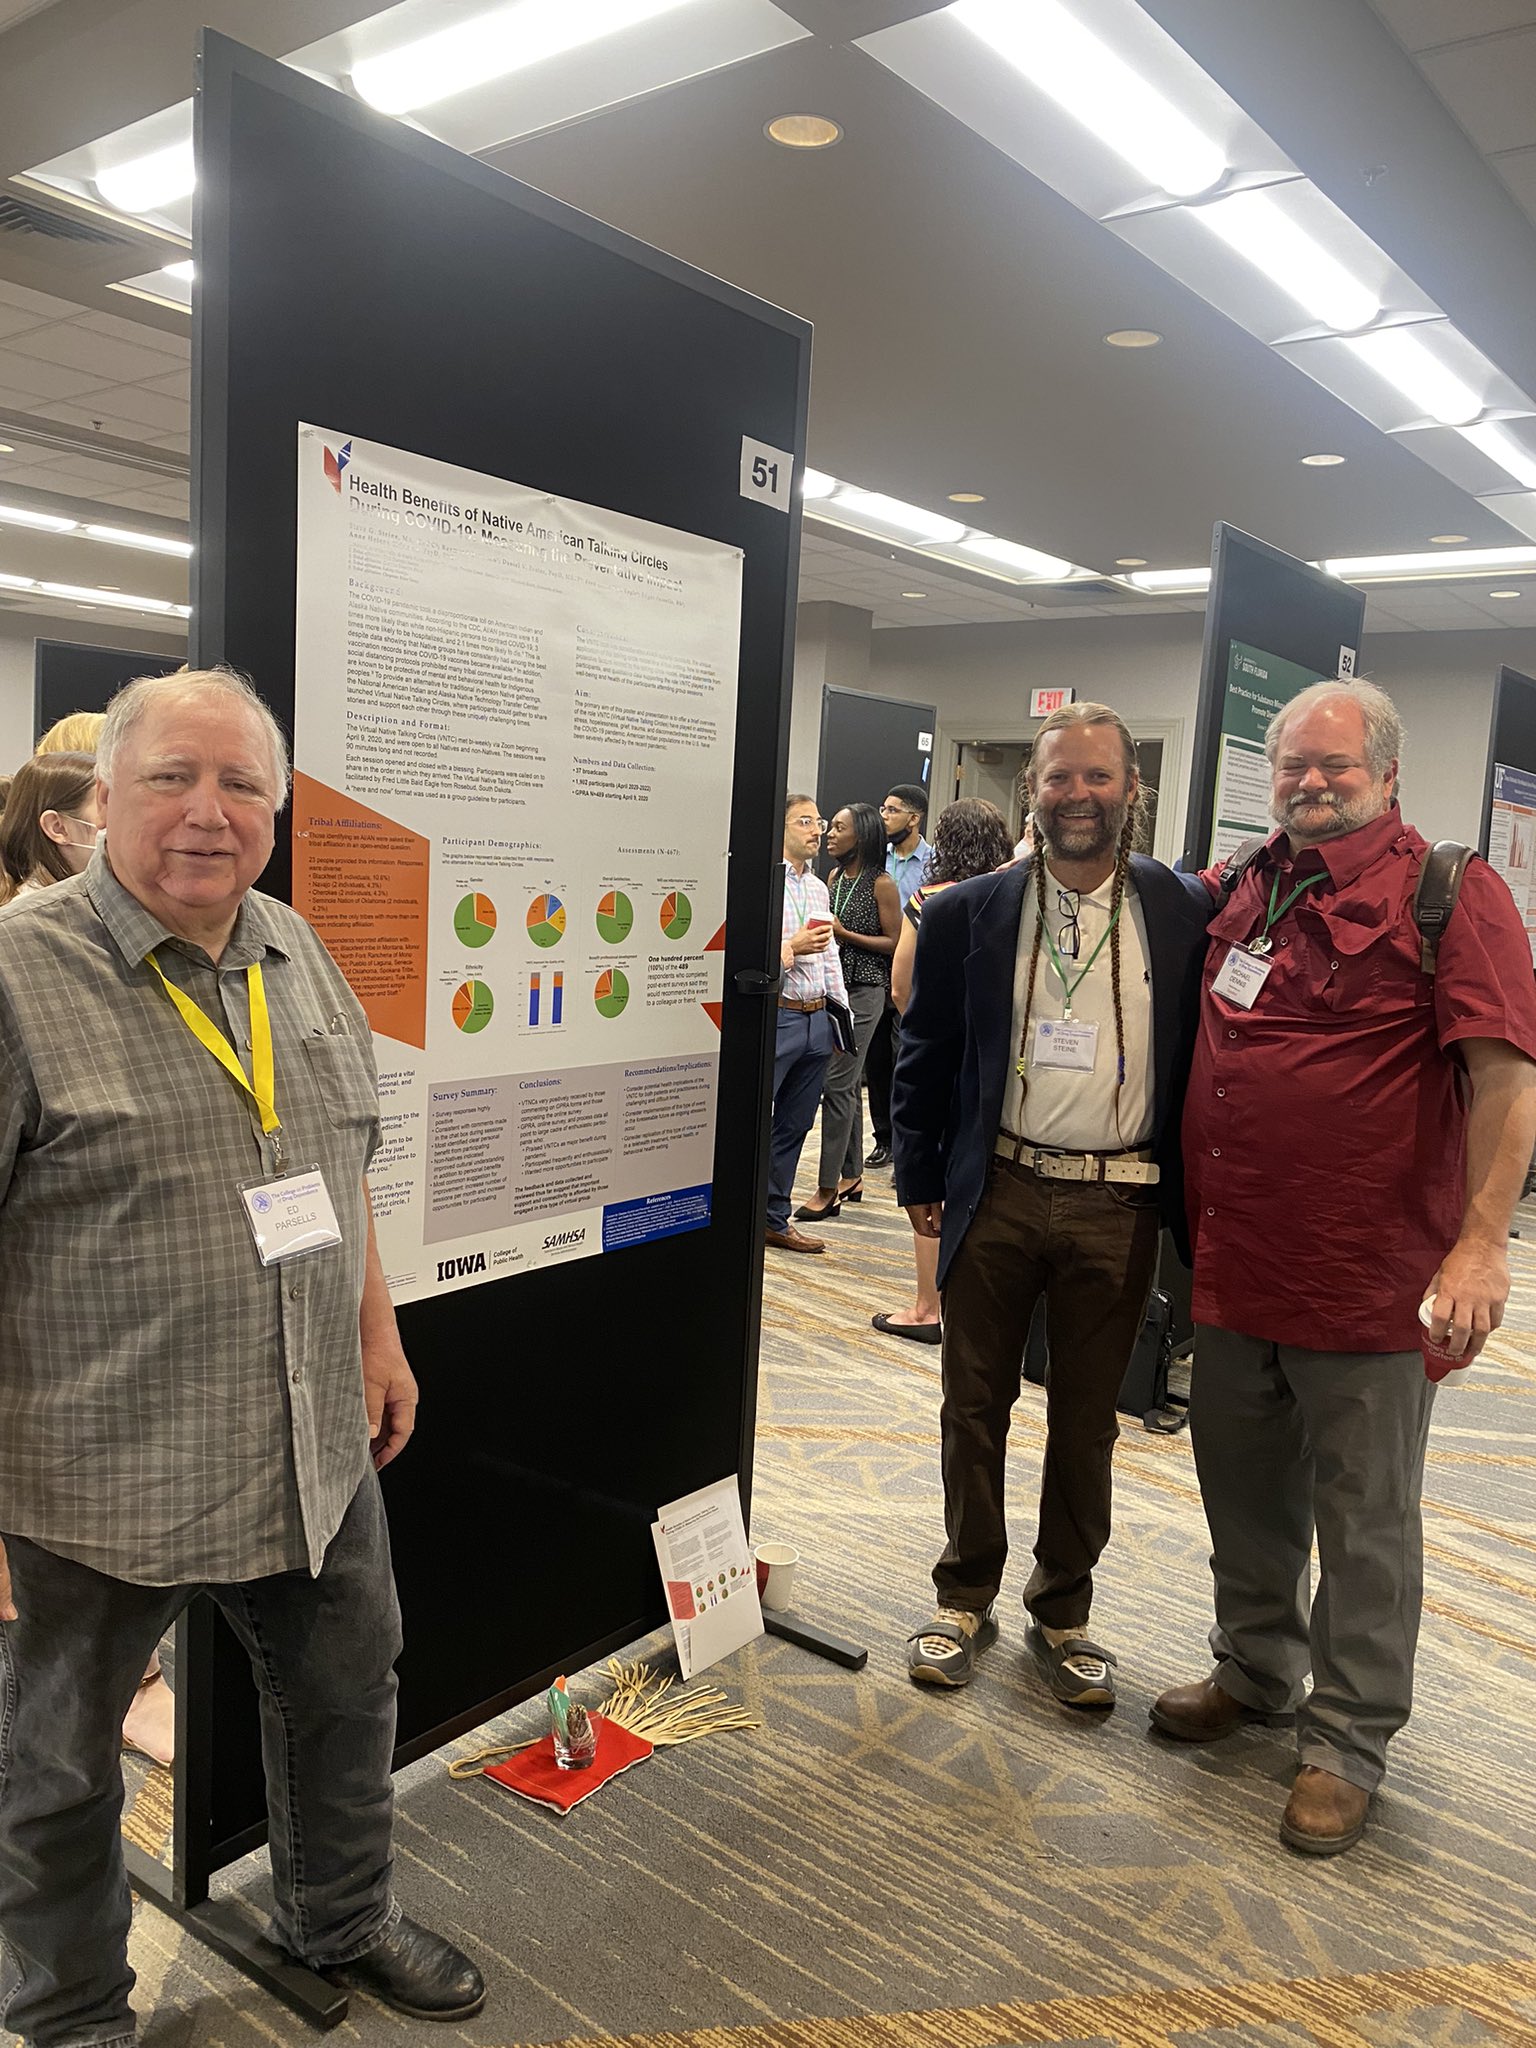 Ed Parcells, Steve Steine, and Michael Dennis at CPDD 2022